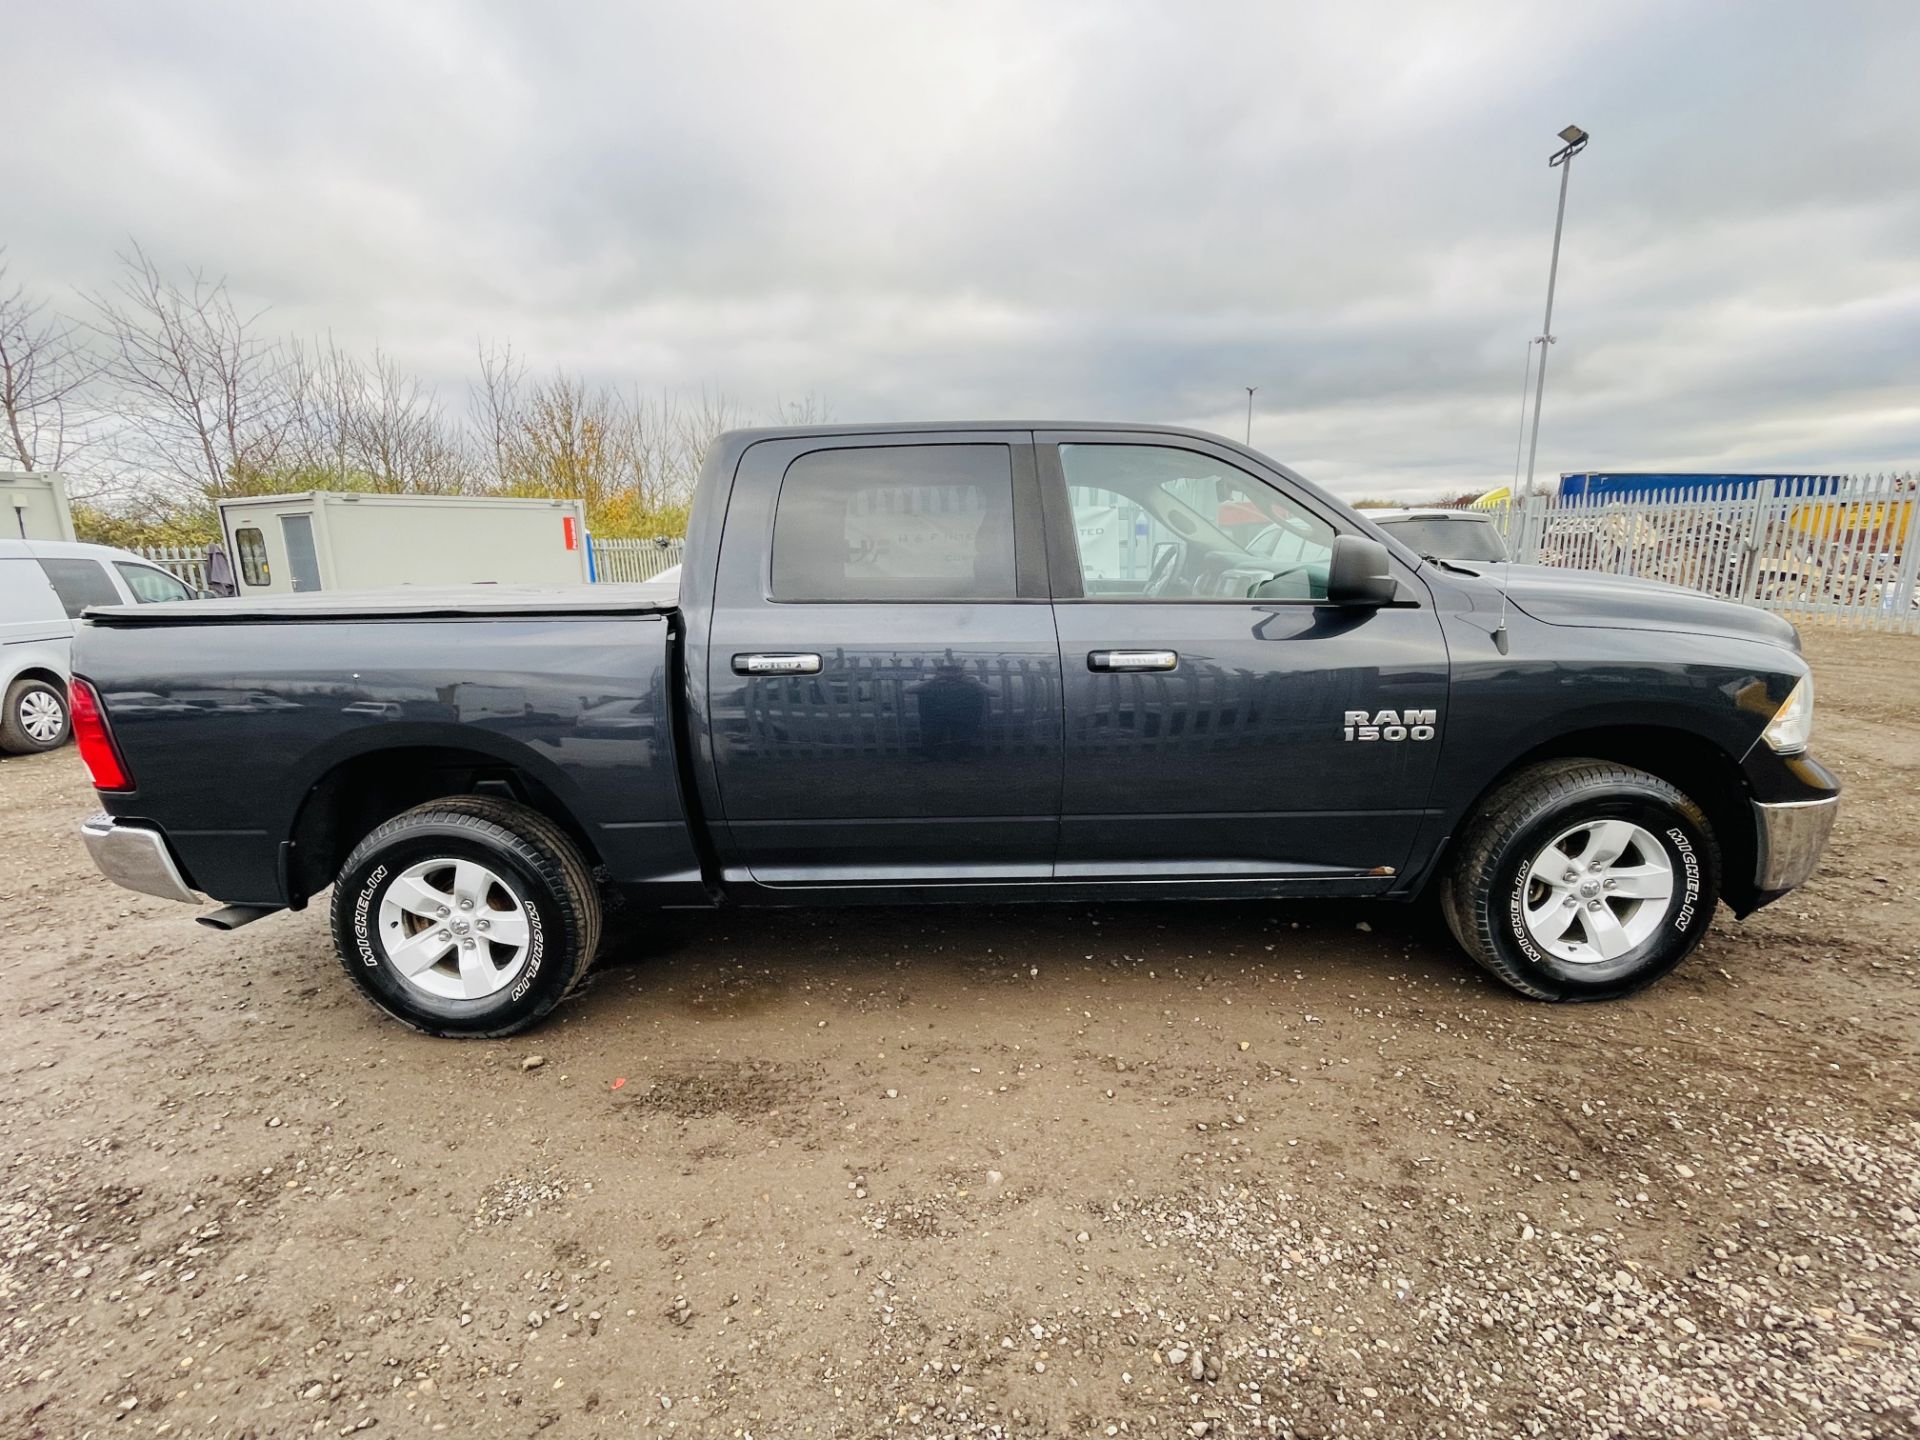 Dodge Ram 3.6 V6 1500 Crew Cab SLT 4WD ' 2015 Year ' A/C - 6 Seats - Chrome Package - Image 10 of 21